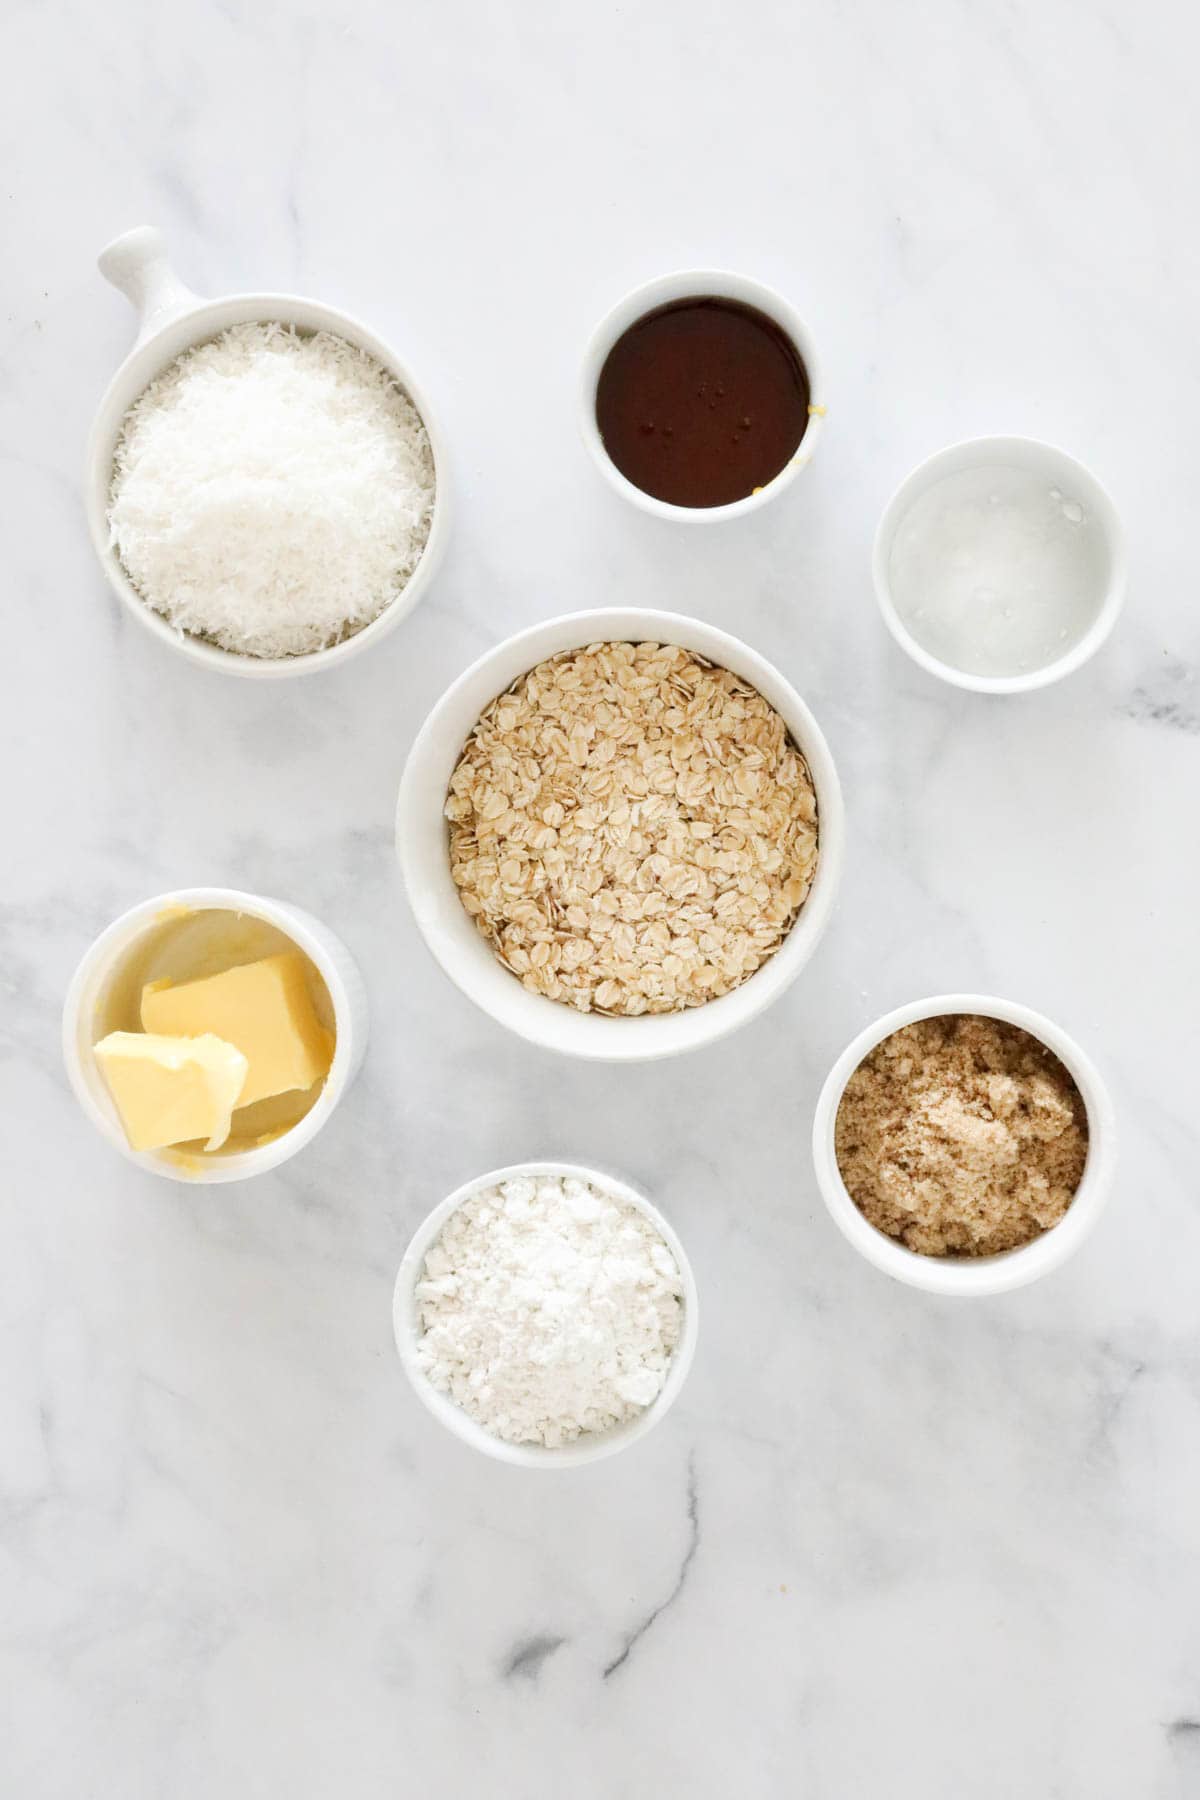 Ingredients needed to make the recipe weighed out and placed in individual bowls.